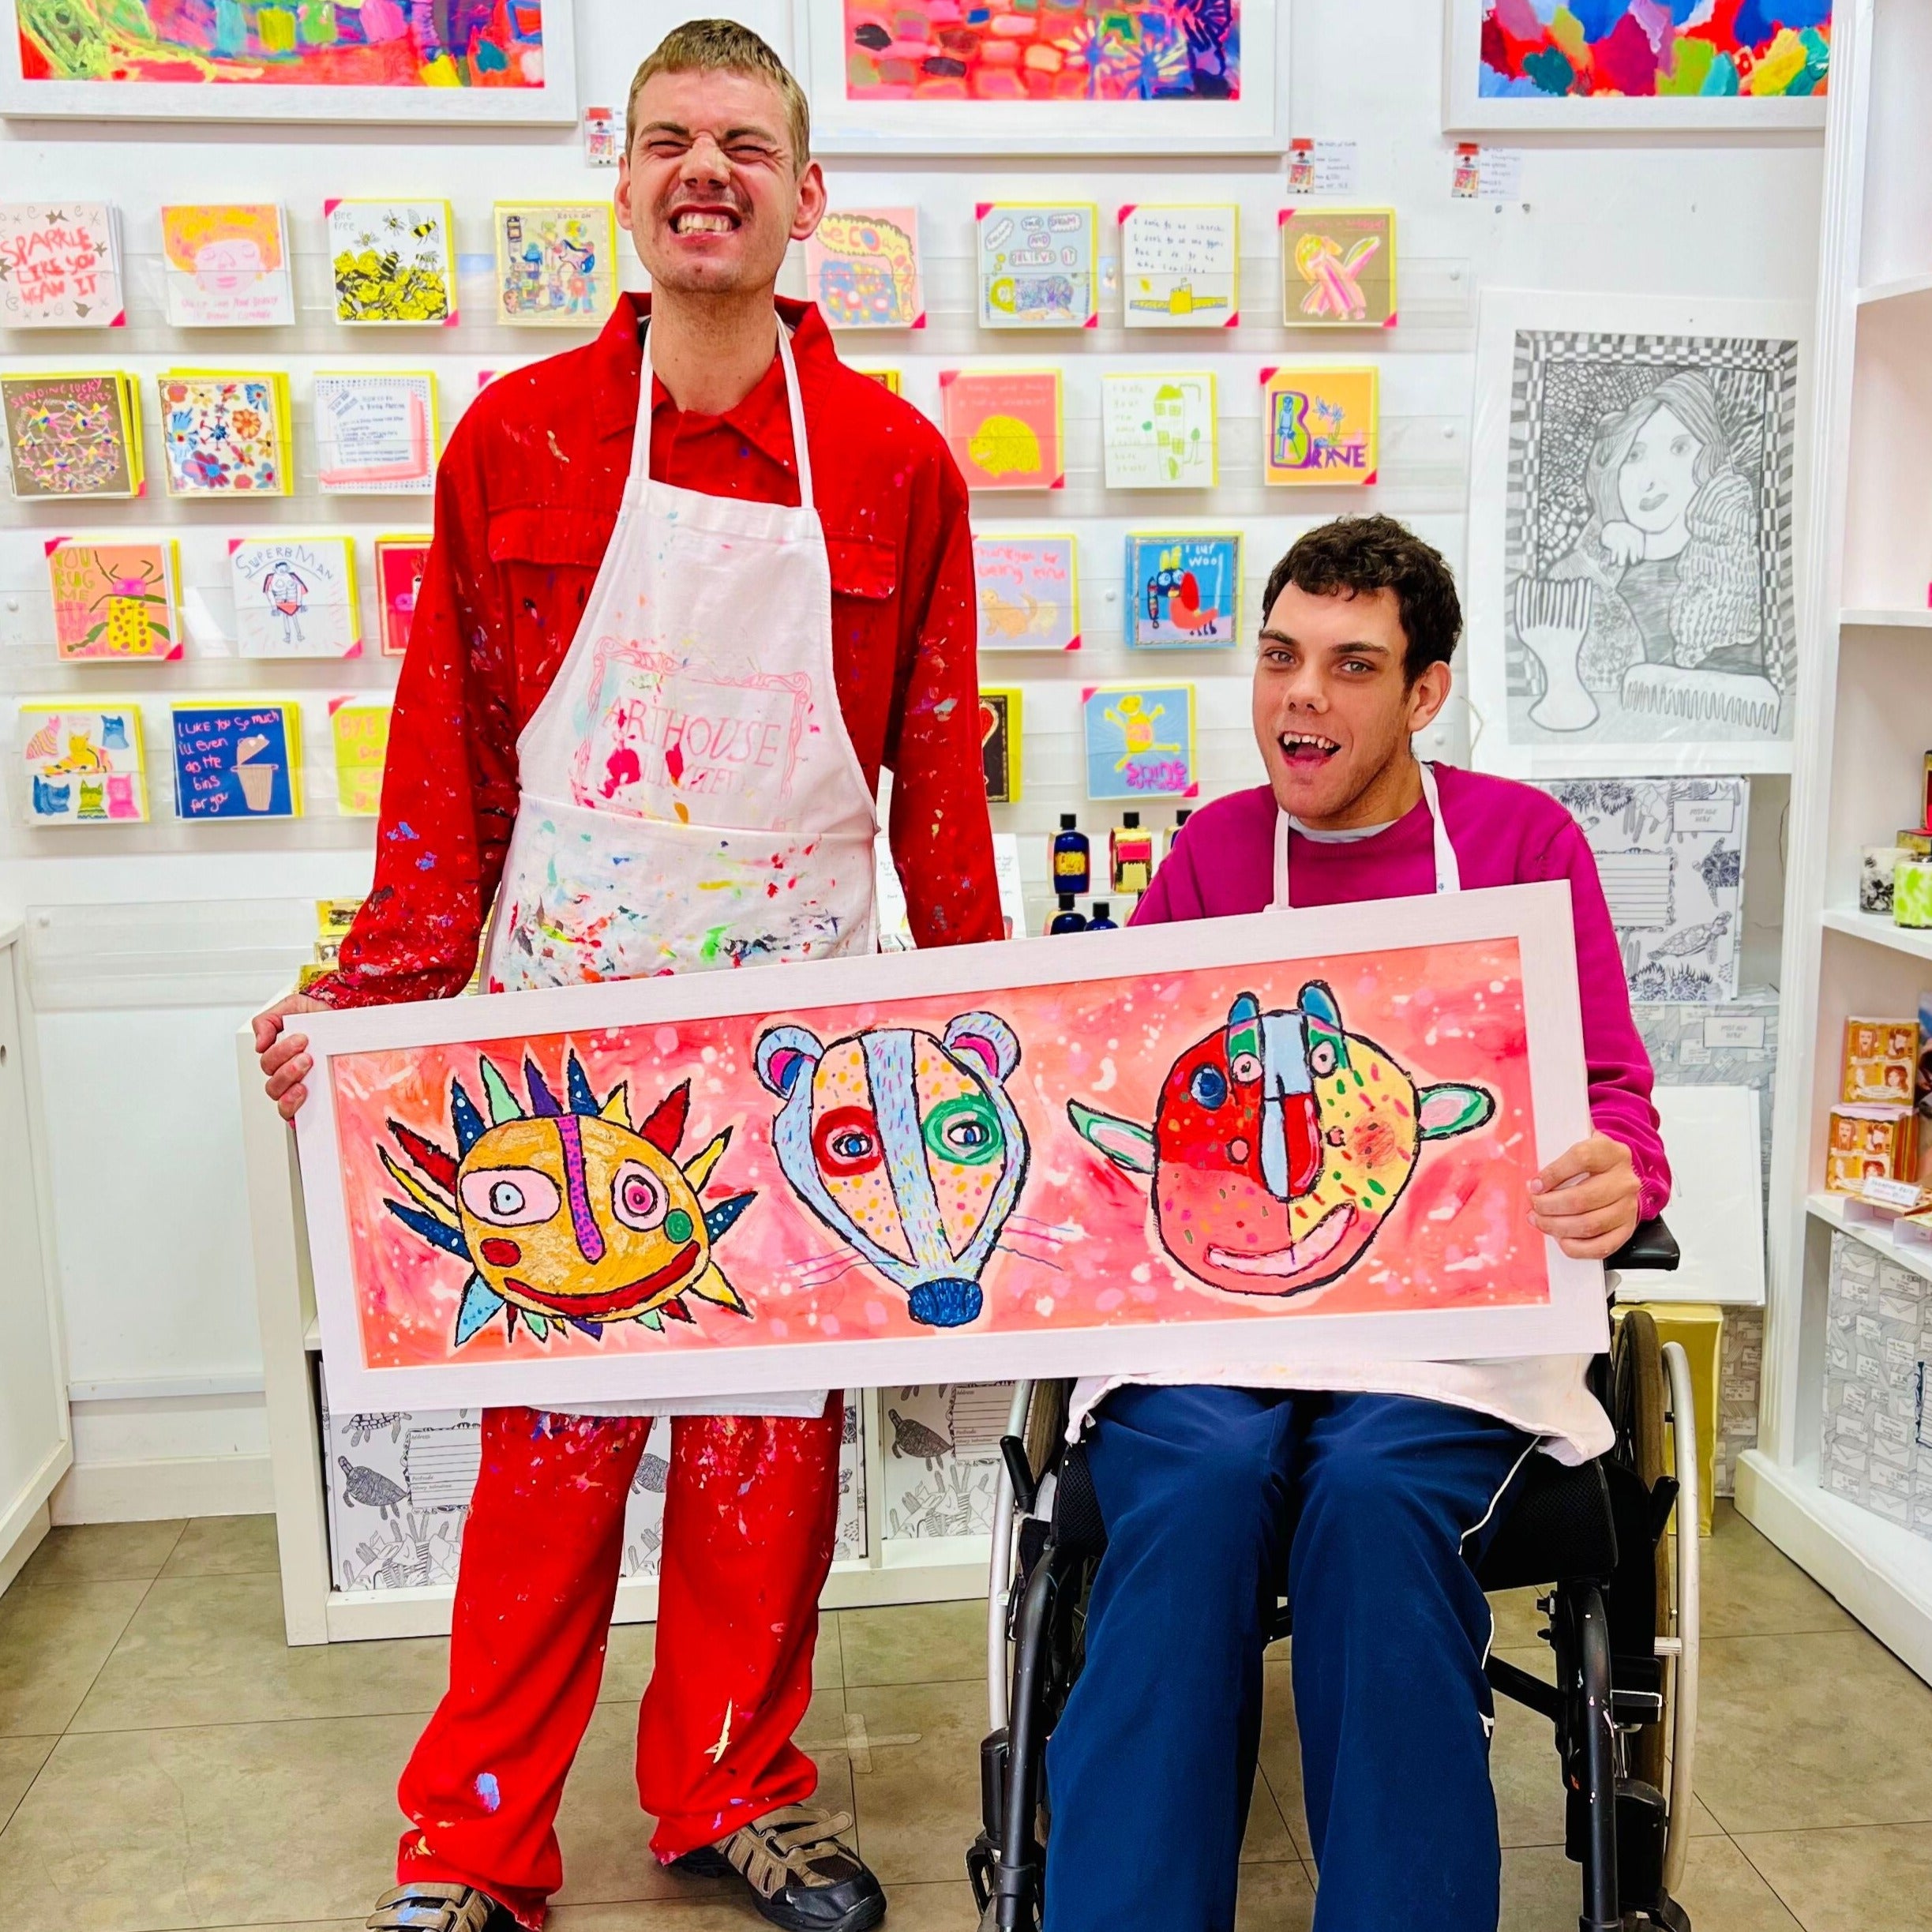 2 male artists holding Framed colourful artwork of an abstract sun, badger and a man